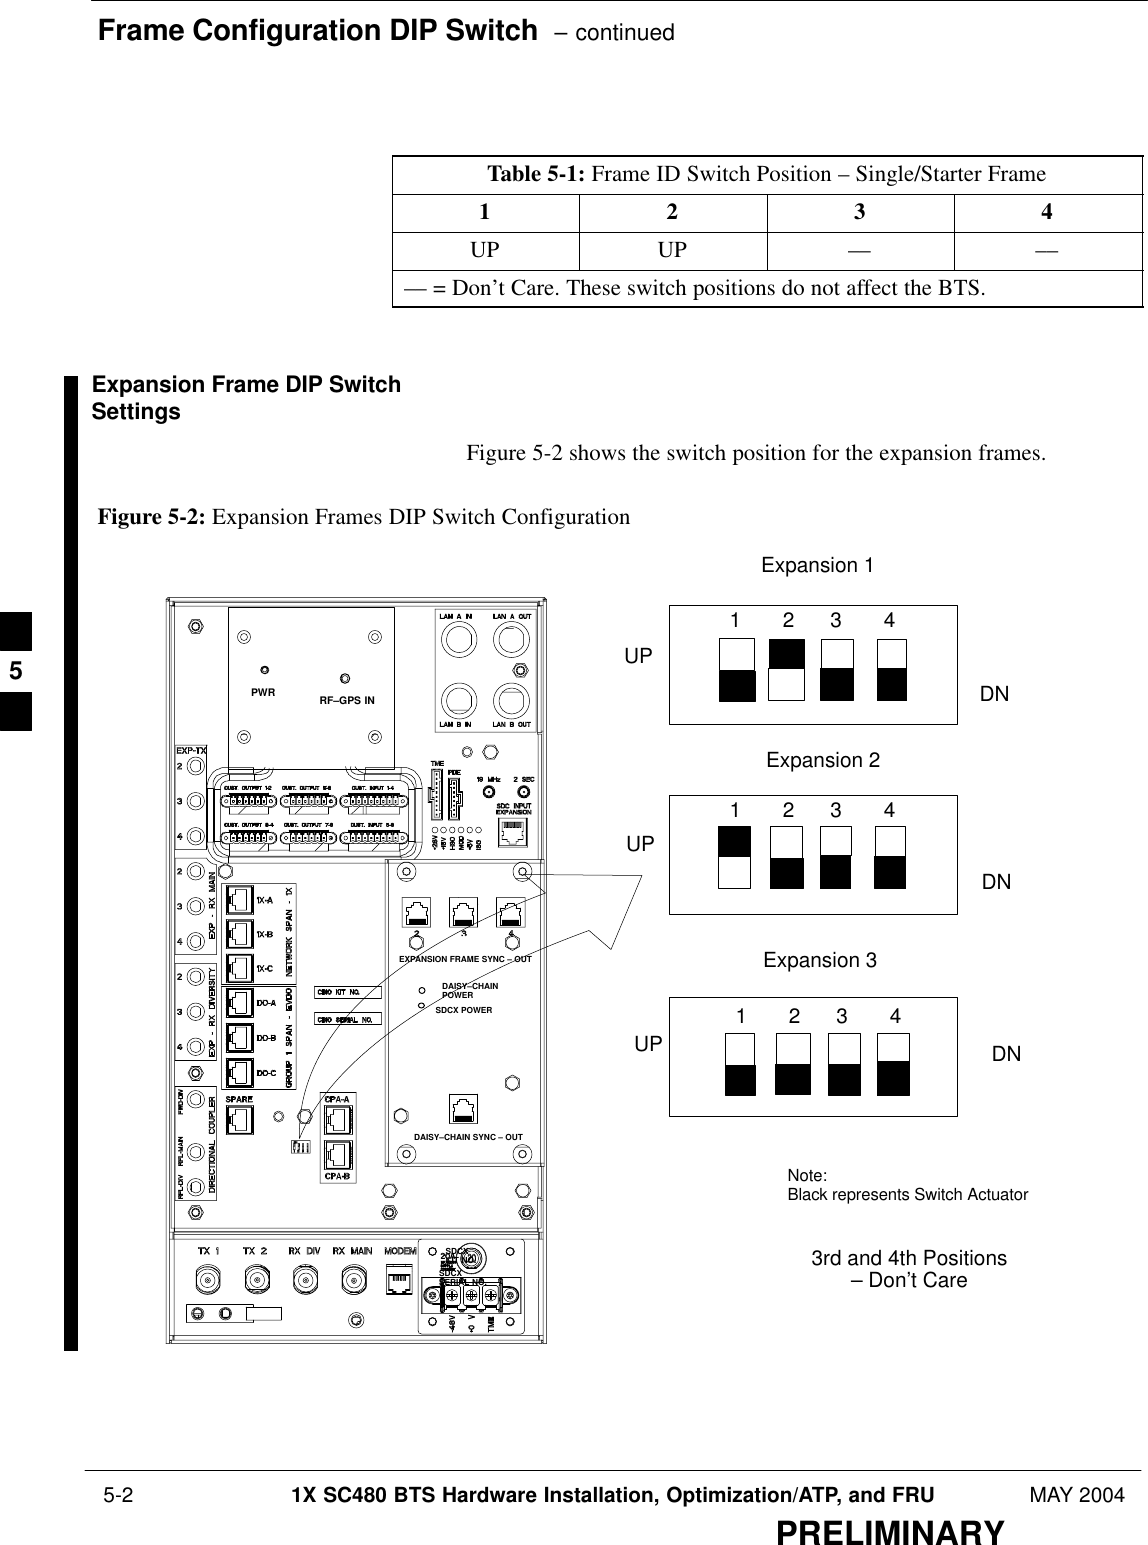 Frame Configuration DIP Switch  – continued 5-2 1X SC480 BTS Hardware Installation, Optimization/ATP, and FRU MAY 2004PRELIMINARYTable 5-1: Frame ID Switch Position – Single/Starter Frame1 2 3 4UP UP –– –––– = Don’t Care. These switch positions do not affect the BTS. Expansion Frame DIP SwitchSettingsFigure 5-2 shows the switch position for the expansion frames.Figure 5-2: Expansion Frames DIP Switch ConfigurationExpansion 13rd and 4th Positions– Don’t Care1       2      3       4DNNote: Black represents Switch ActuatorUPExpansion 21       2      3       4DNUPExpansion 31       2      3       4DNUPDAISY–CHAIN SYNC – OUTSDCXKIT NO.SDCXSERIAL NO.DAISY–CHAINPOWERSDCX POWEREXPANSION FRAME SYNC – OUTRF–GPS INPWR5